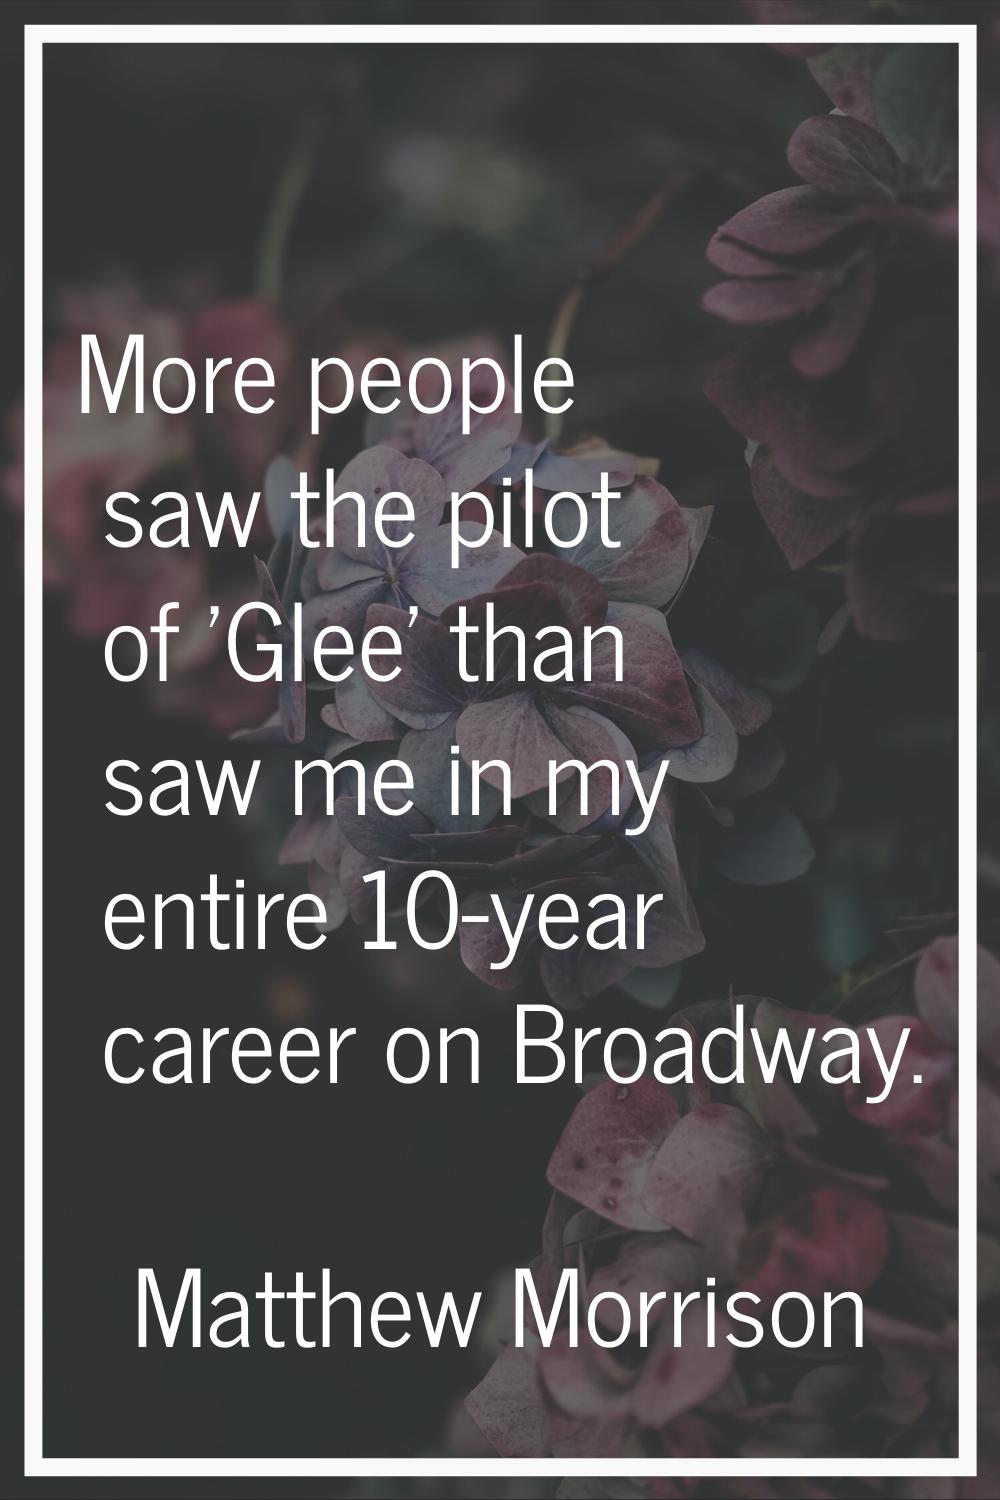 More people saw the pilot of 'Glee' than saw me in my entire 10-year career on Broadway.